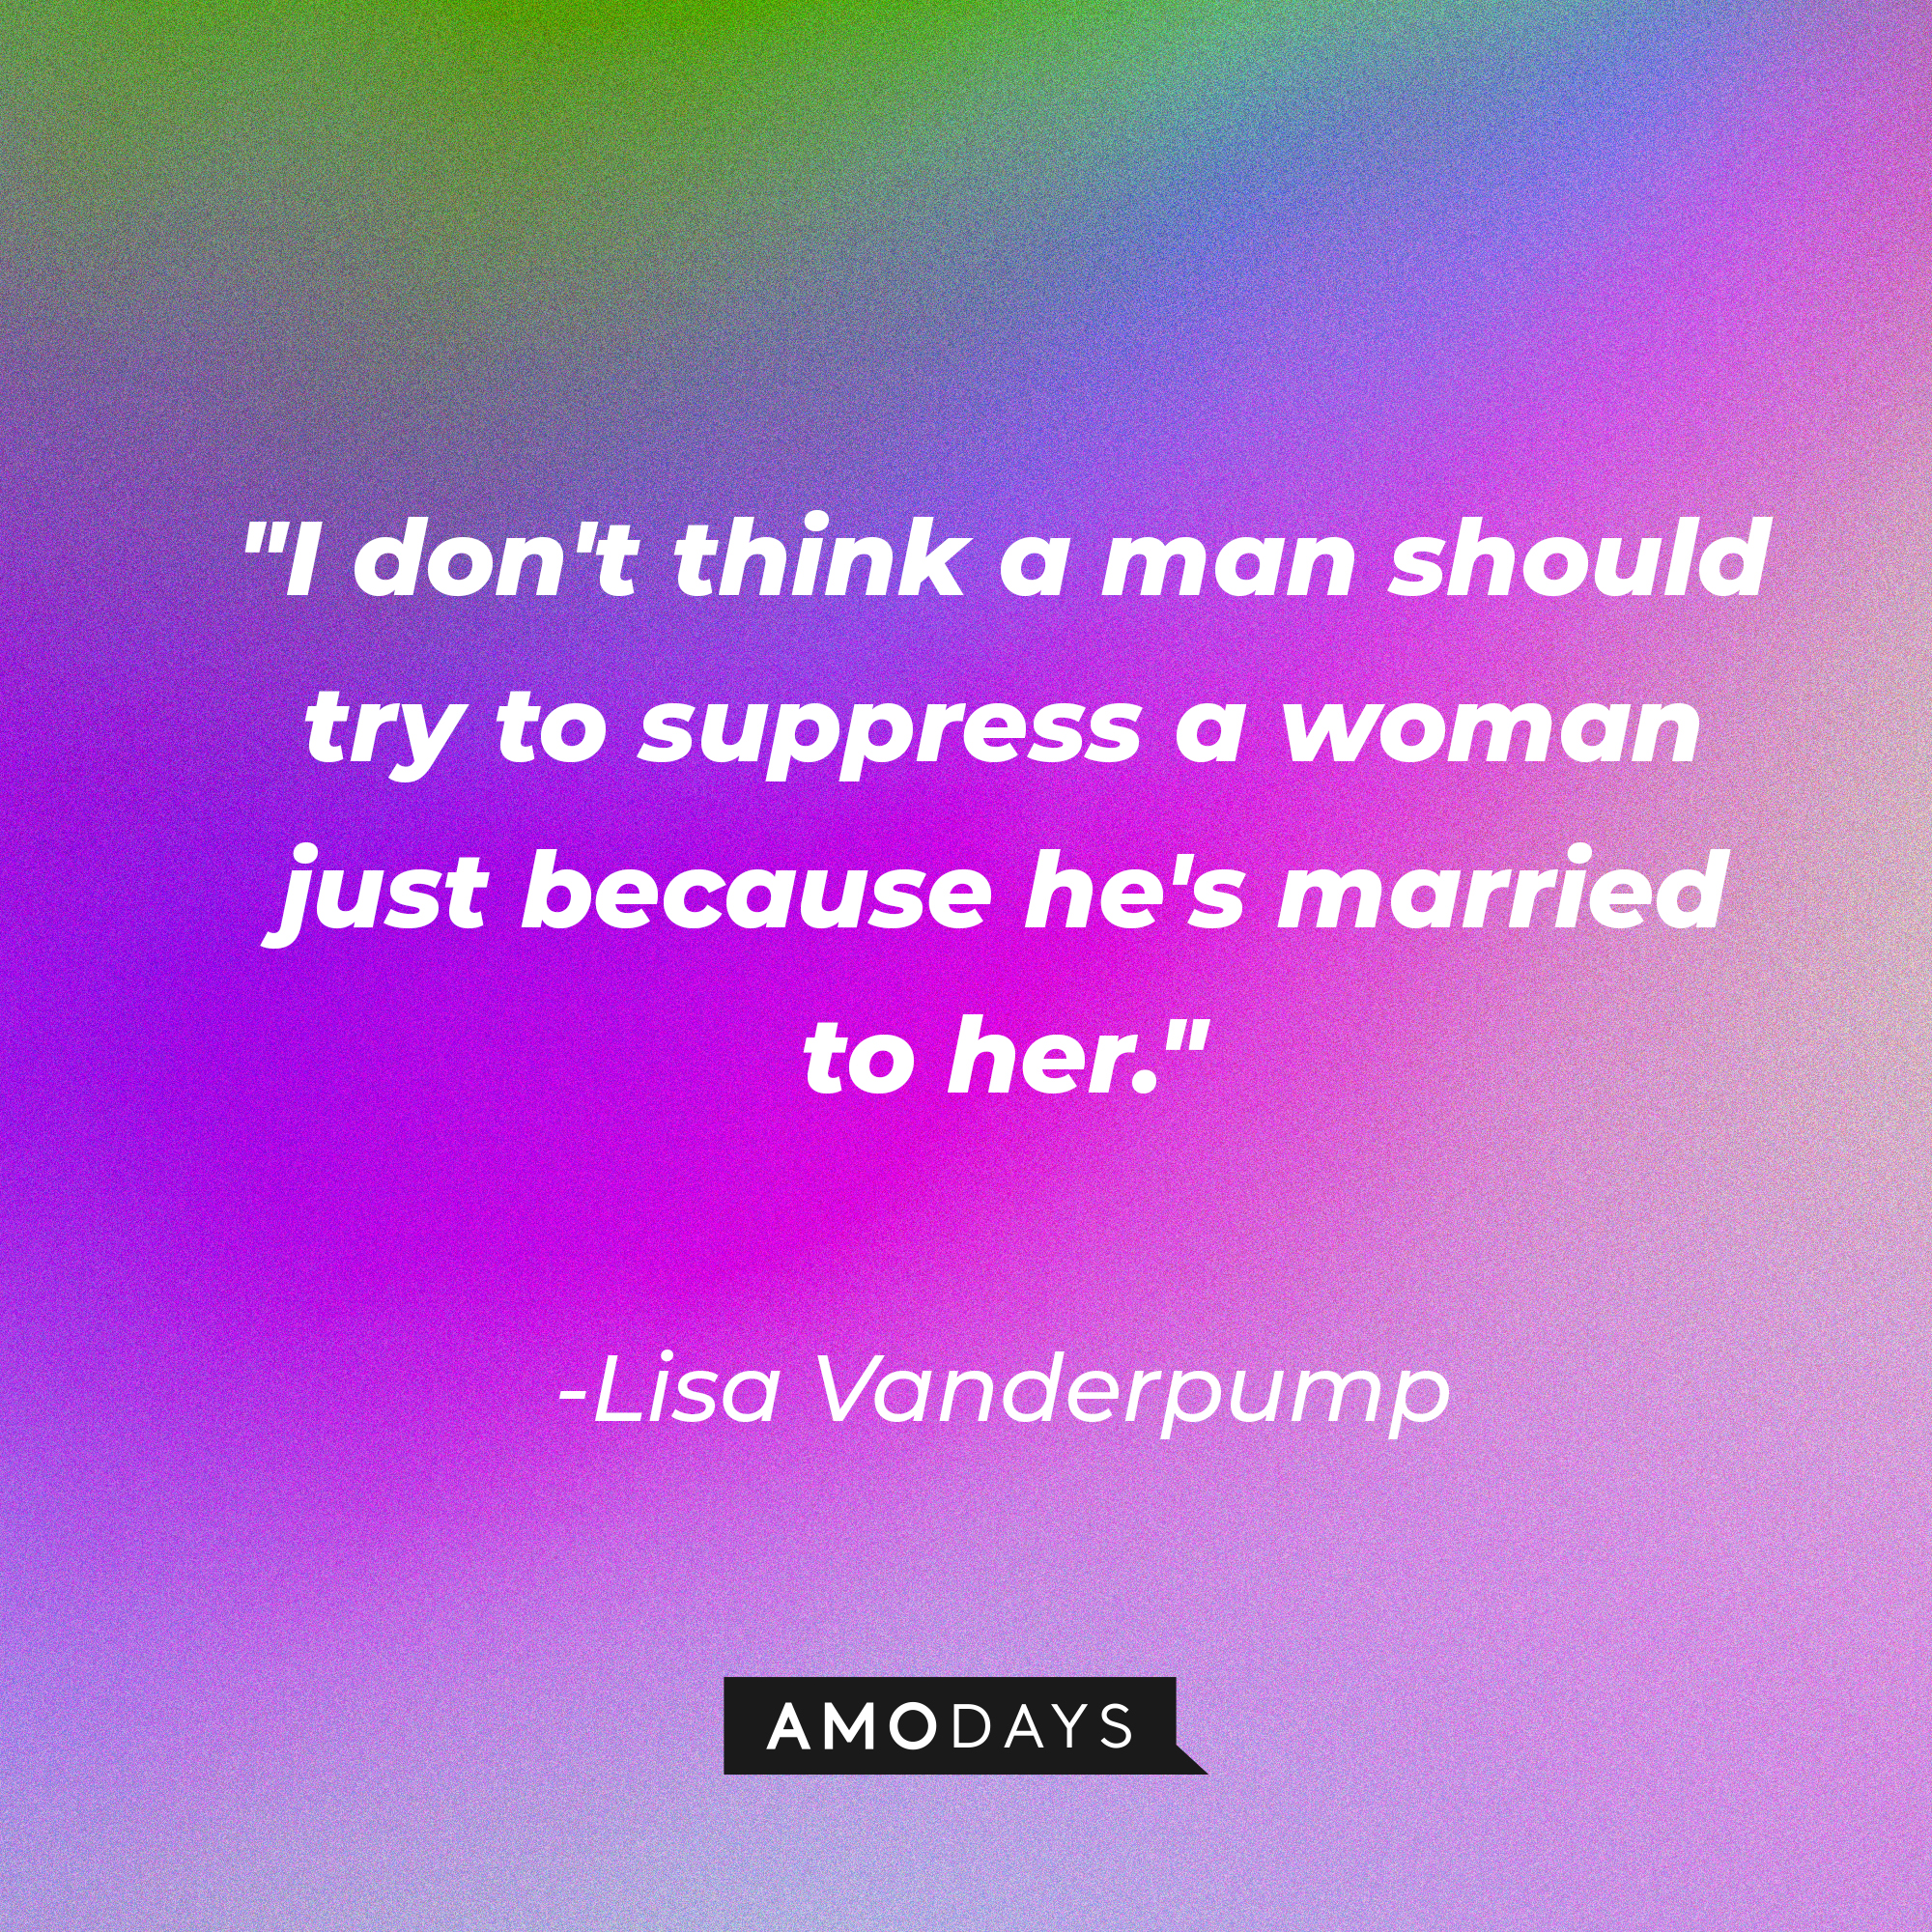 Lisa Vanderpump’s quote: I don't think a man should try to suppress a woman just because he's married to her.” | Source: AmoDays